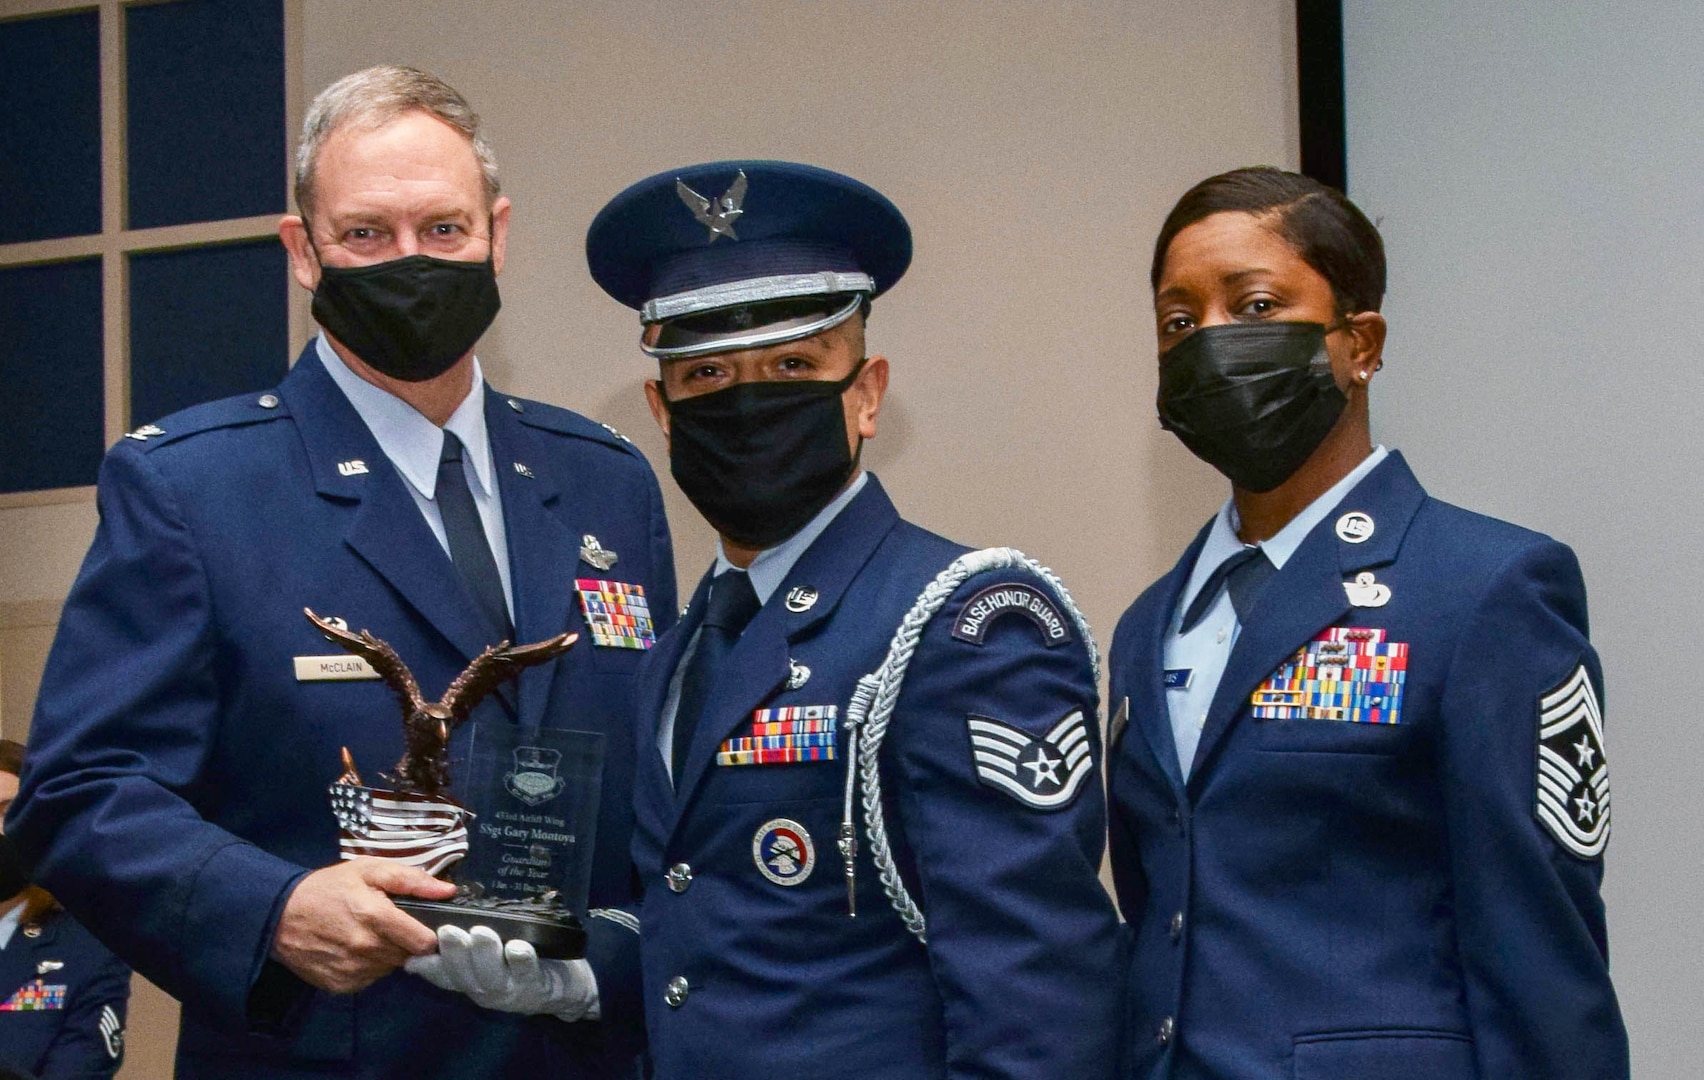 Col. Terry McClain, 433rd Airlift Wing commander, and Chief Master Sgt. Takesha Williams, 433rd AW command chief, present the Honor Guard/Guardian of the Year award to Staff Sgt. Gary Montoya, 74th Aerial Port Squadron, at the wing’s annual awards ceremony Feb. 5, 2022, at Joint Base San Antonio-Lackland, Texas. (U.S. Air Force photo by Staff Sgt. Monet Villacorte)